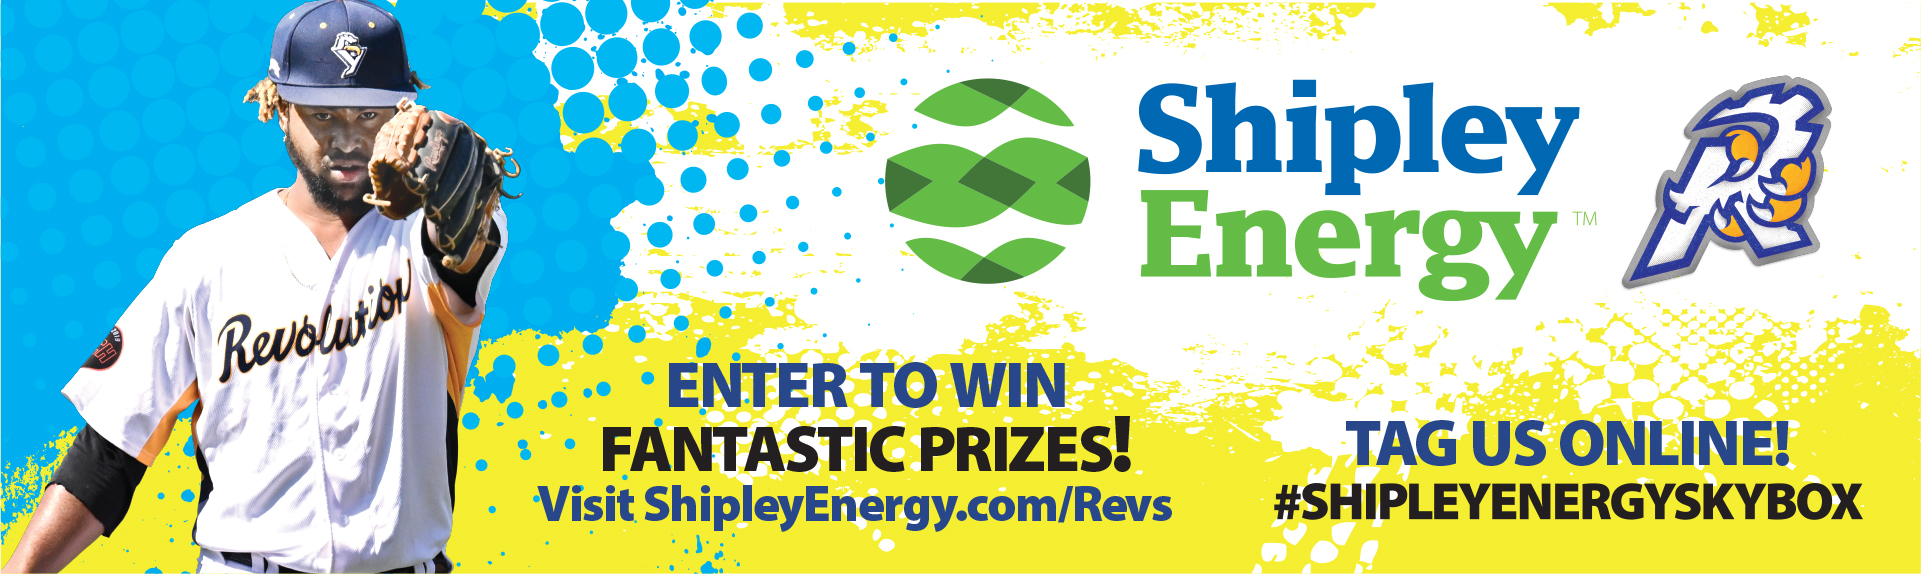 Enter to win skybox seats for a game with Shipley Energy and the York Revolution